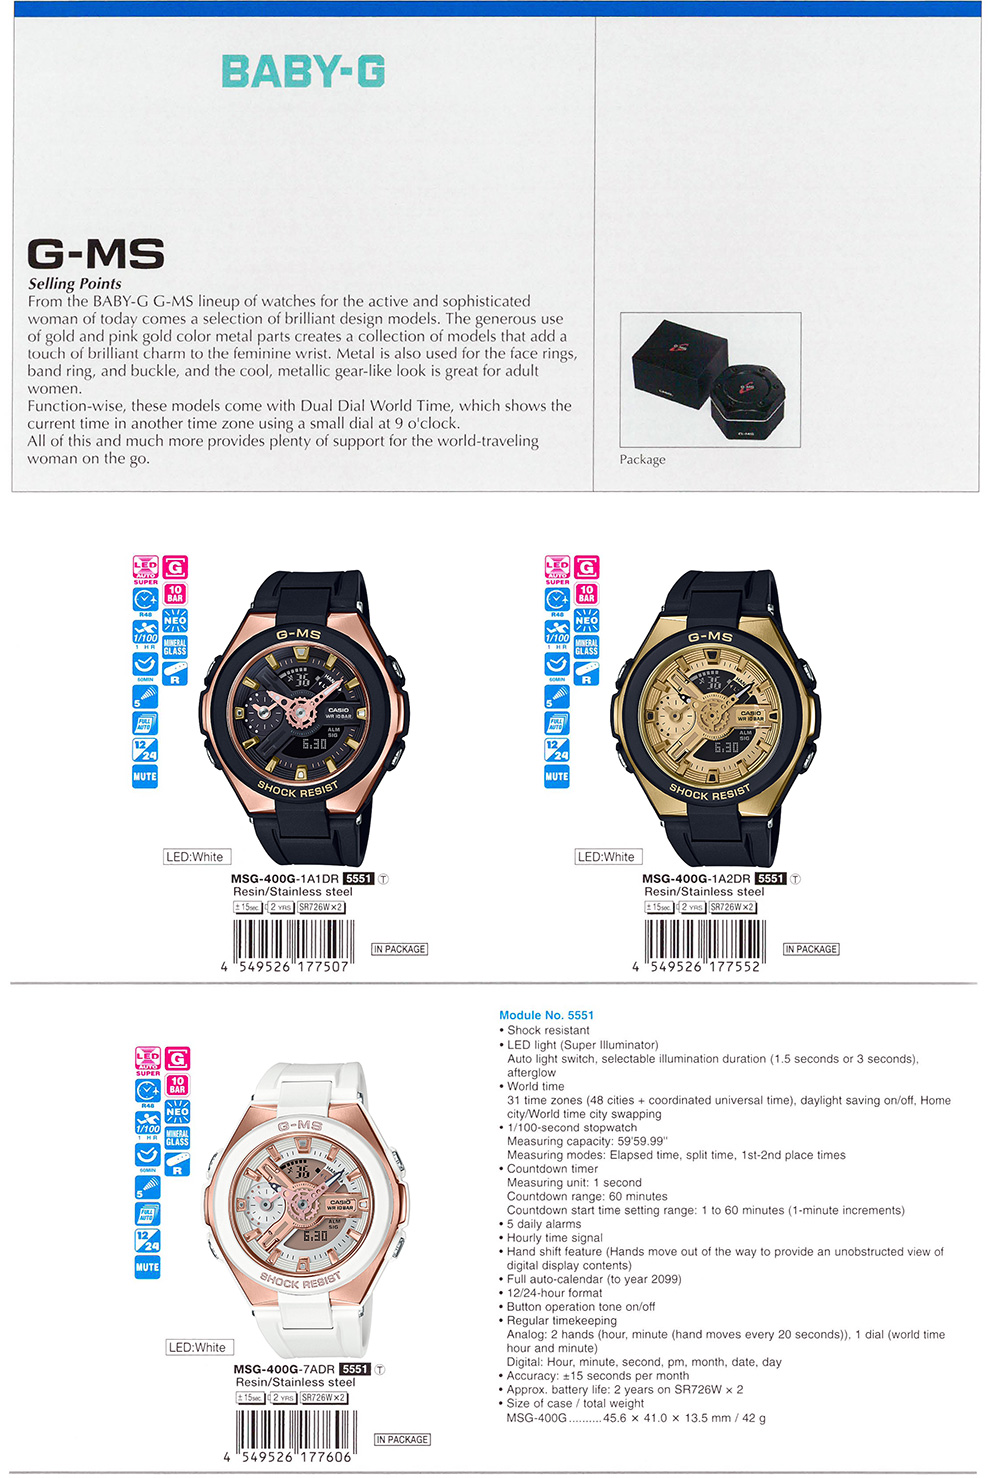 BABY-G, G-MS, Woman, brilliant design, dual dial world time, world-traveling, metallic gear-like look, MSG-400G-1A1, MSG-400G-1A2, MSG-400G-7A